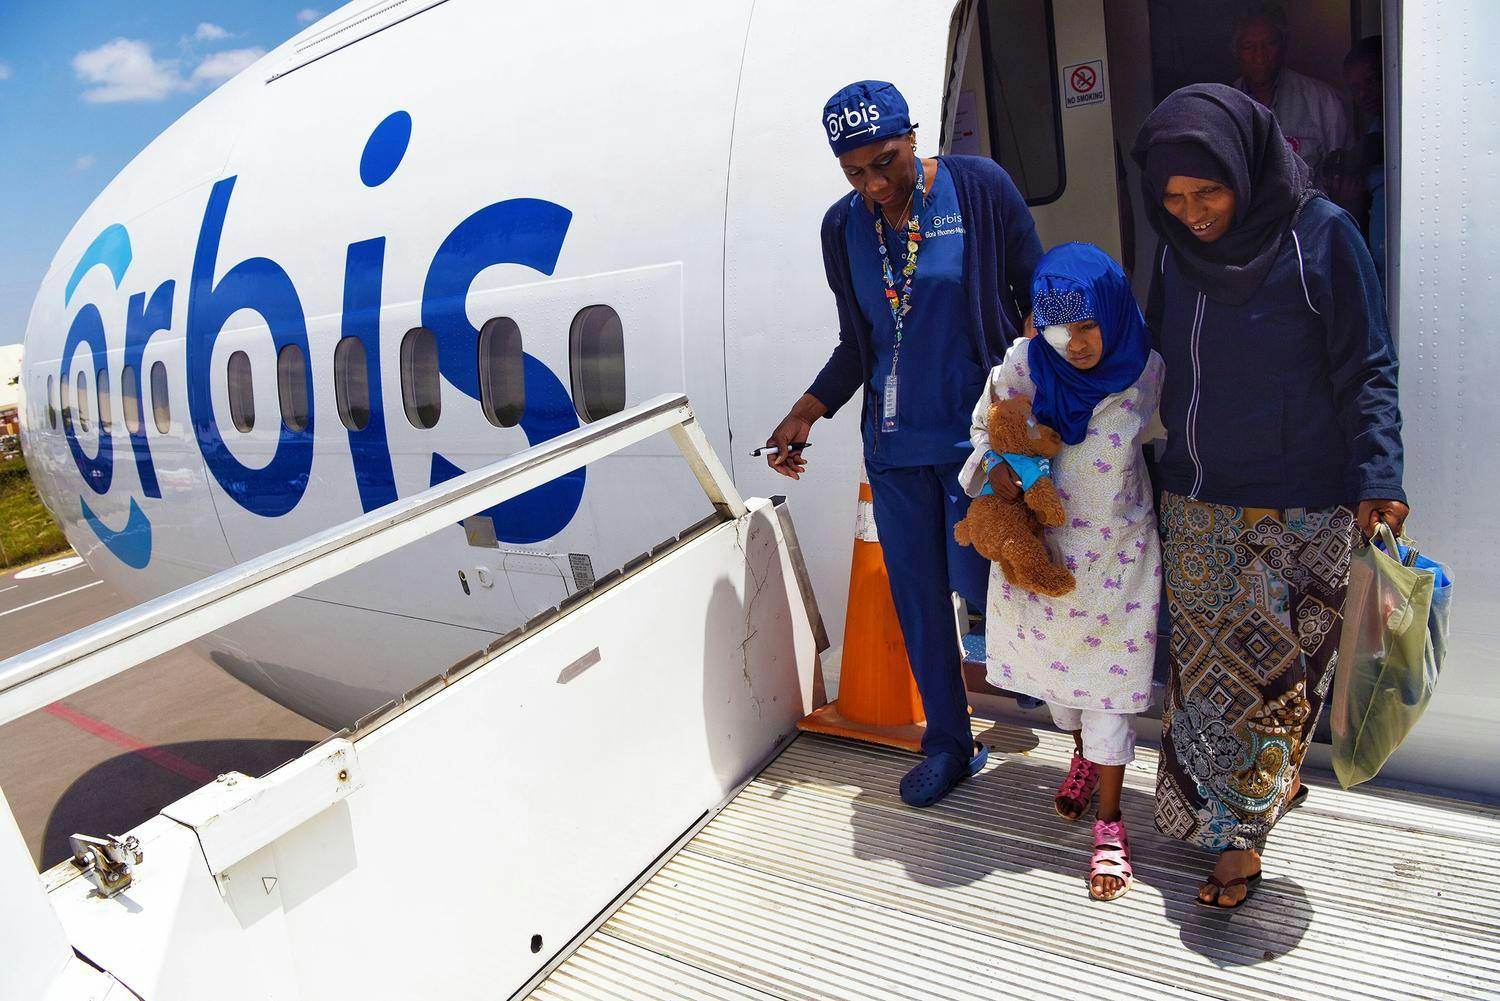 Since 1982, 3 generations of the Flying Eye Hospital have taken eye care teams to more than 95 countries around the world. Image courtesy of Geoff Oliver Bugbee/Orbis